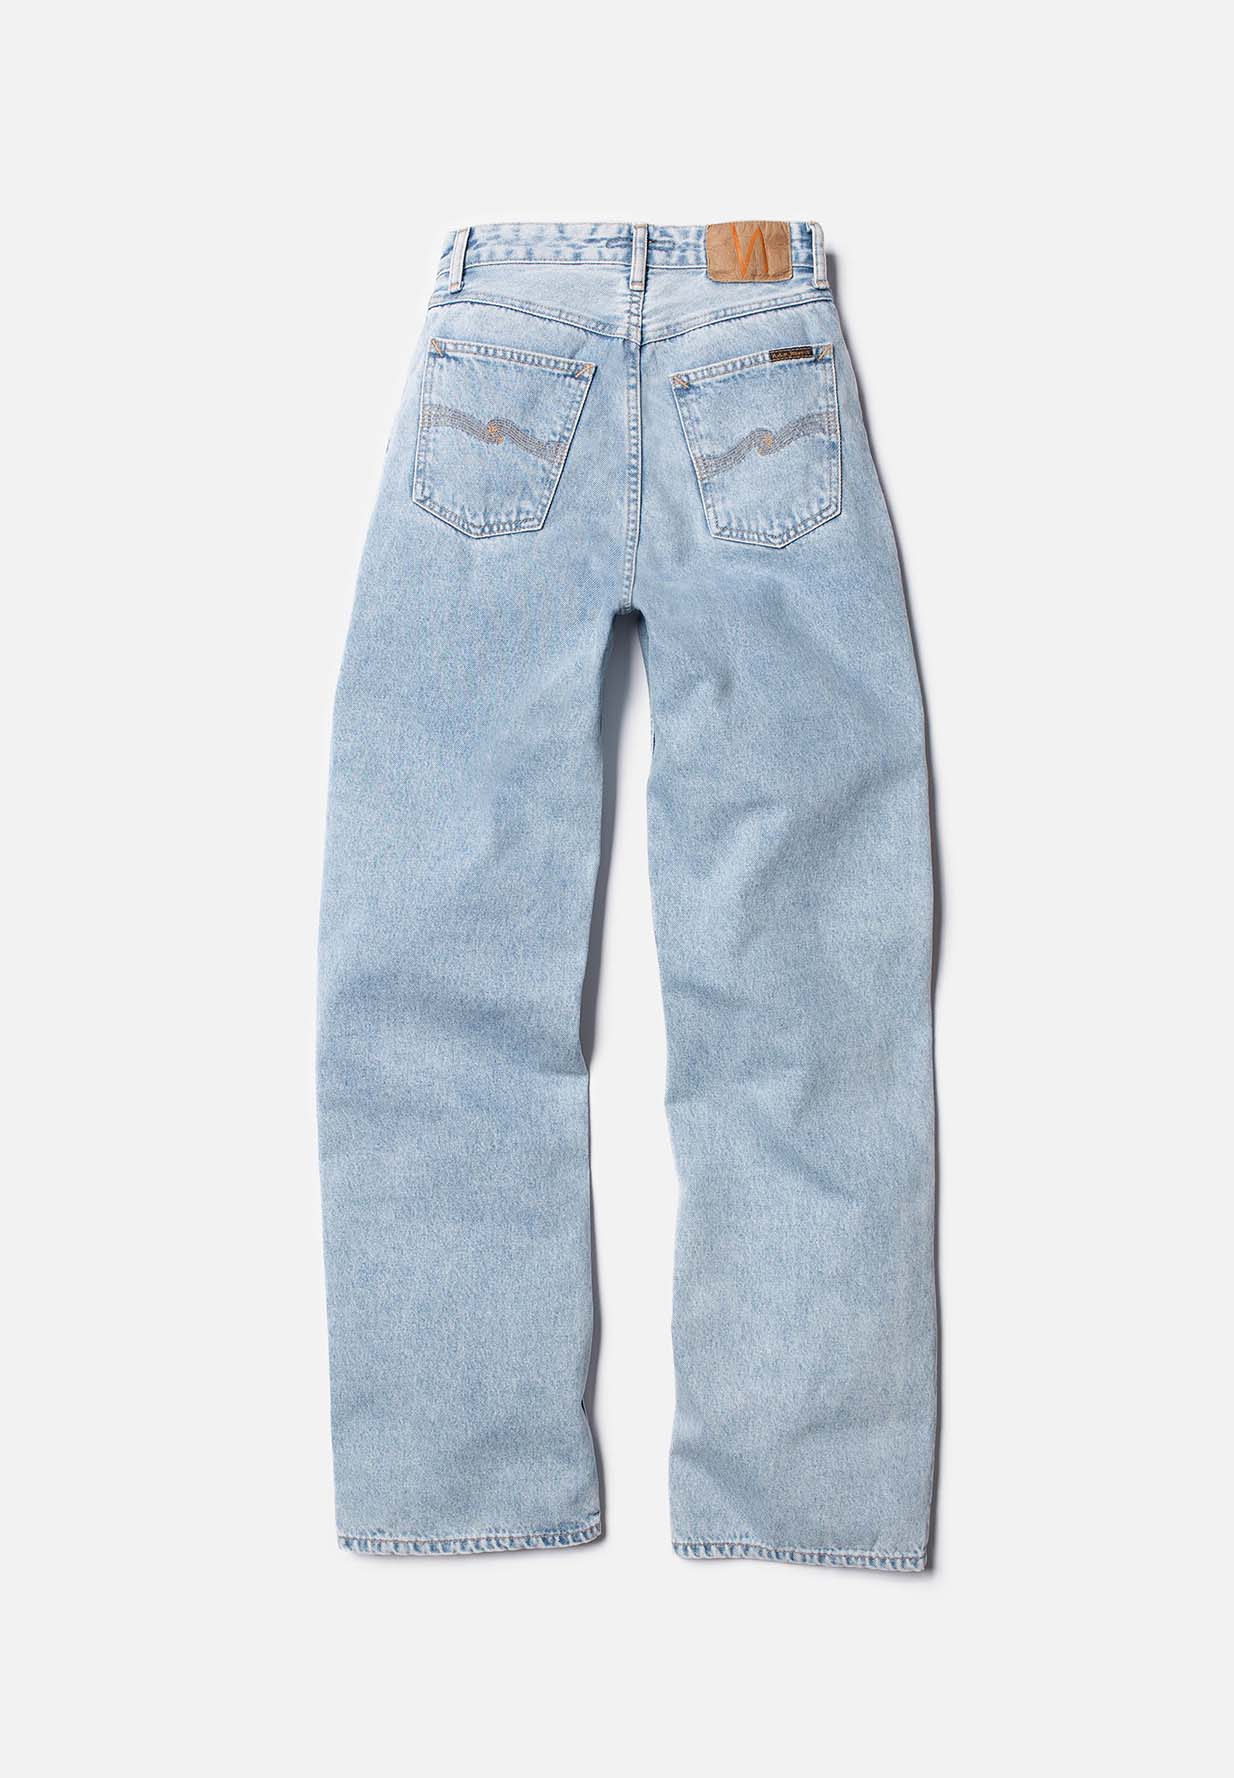 NUDIE JEANS Jeans Clean Eileen sunny blue 27/28